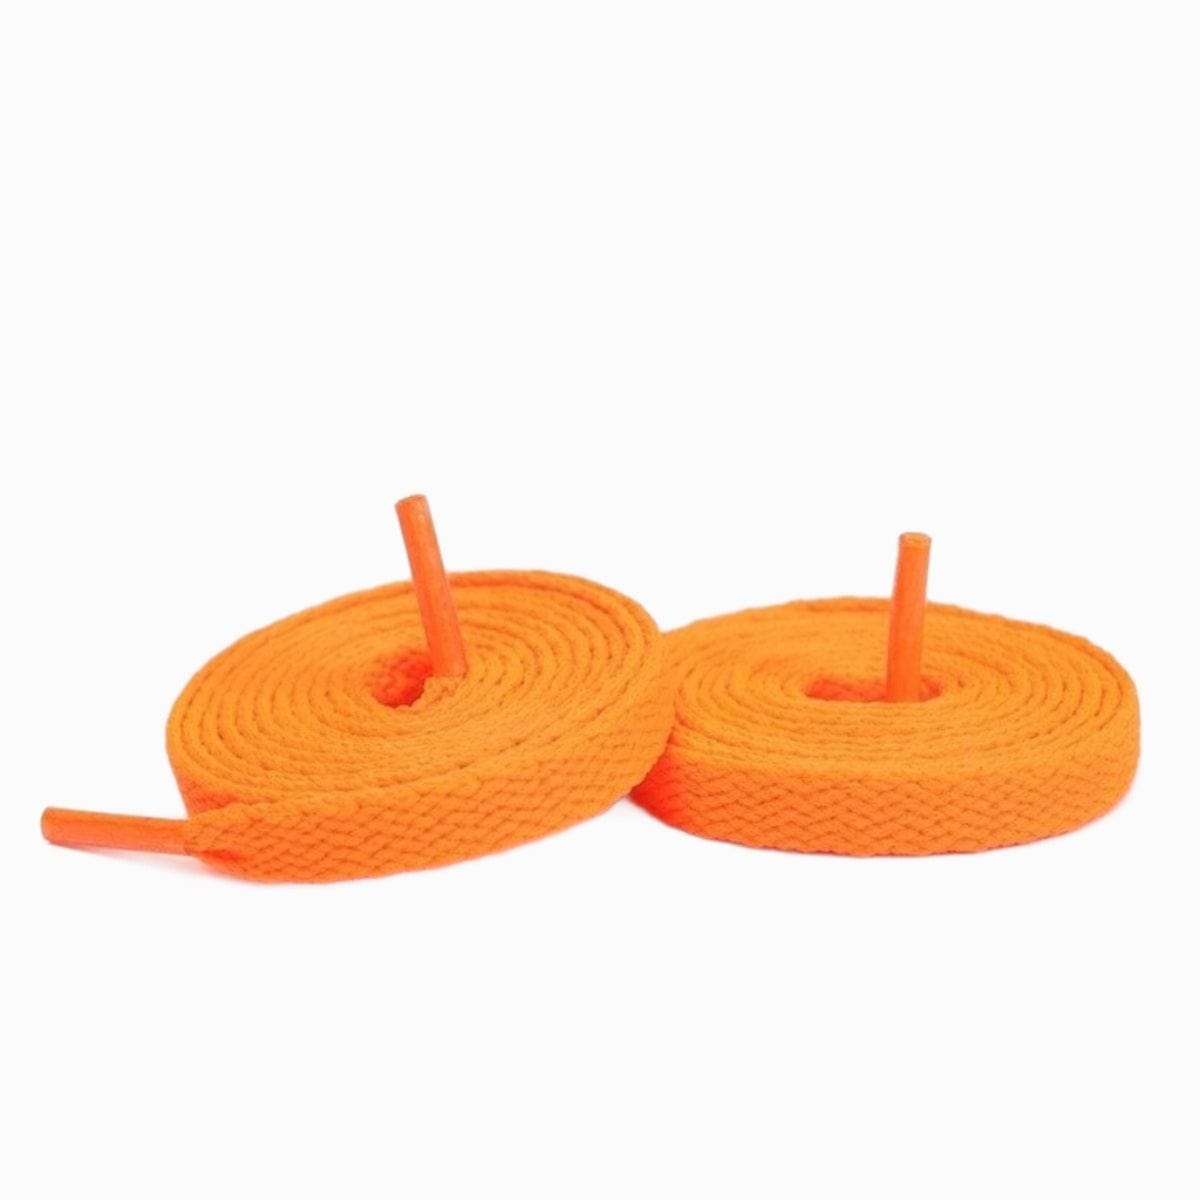 orange-fun-shoelaces-suitable-for-tying shoelaces-on-popular-sneakers